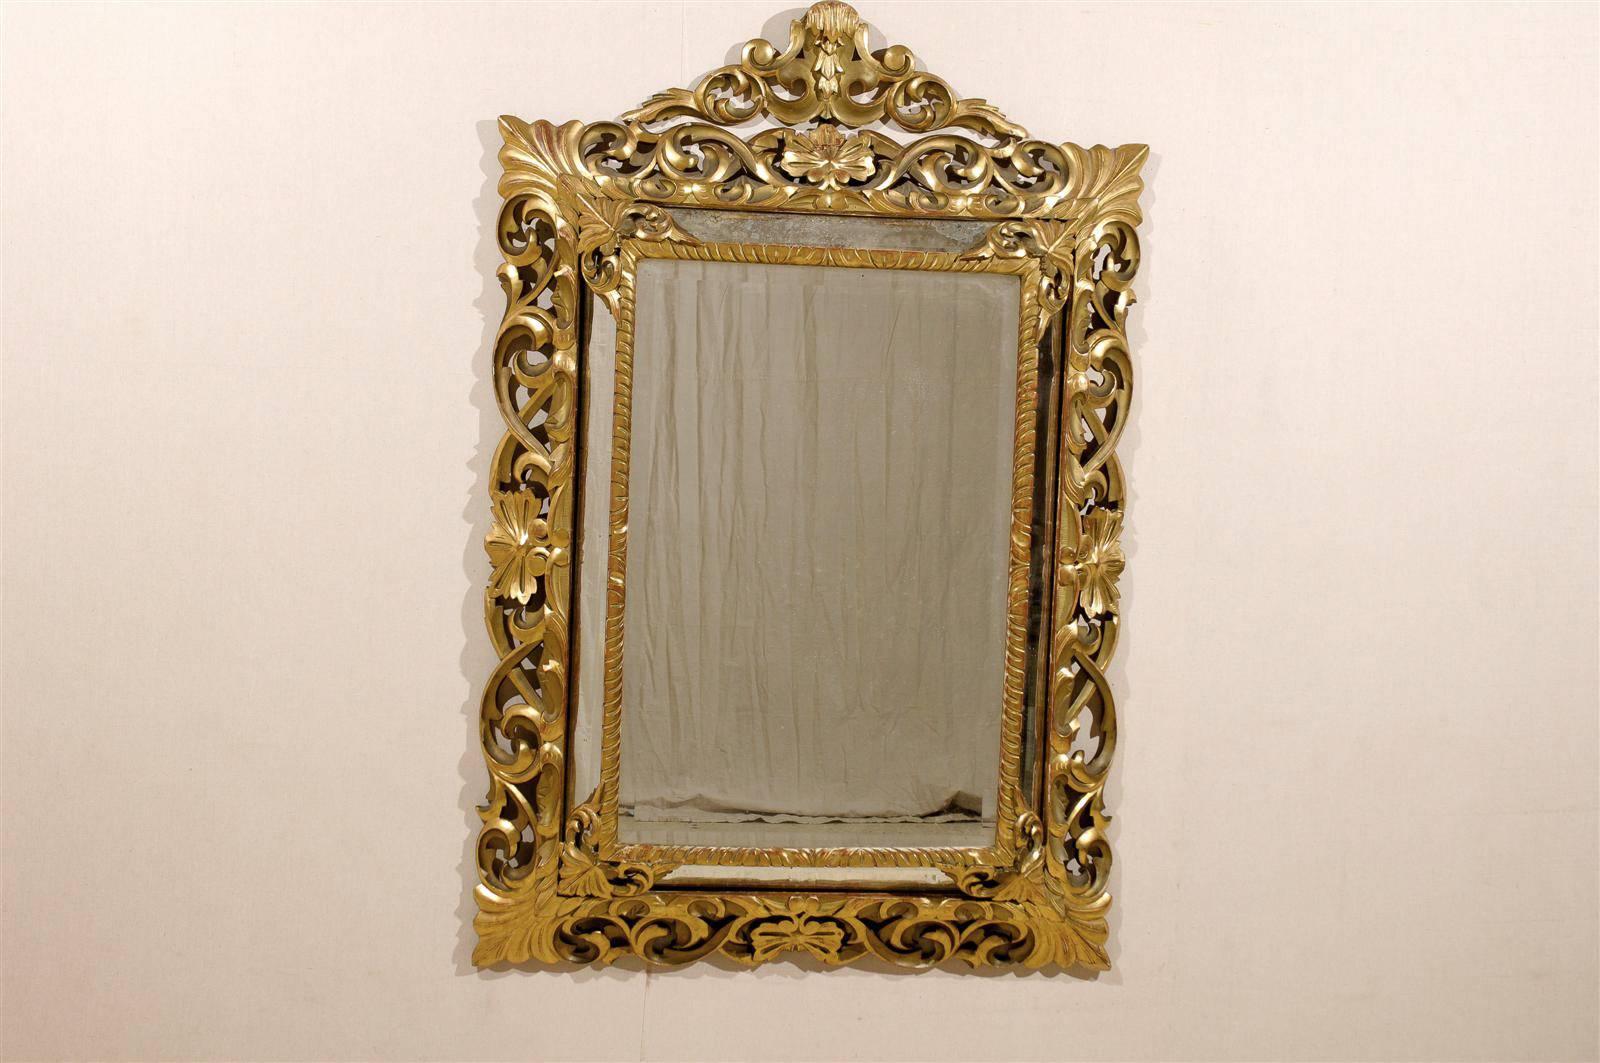 Carved An Italian 19th Century Gilt Wood Mirror with Ornate Foliage Decor, Gold Color For Sale